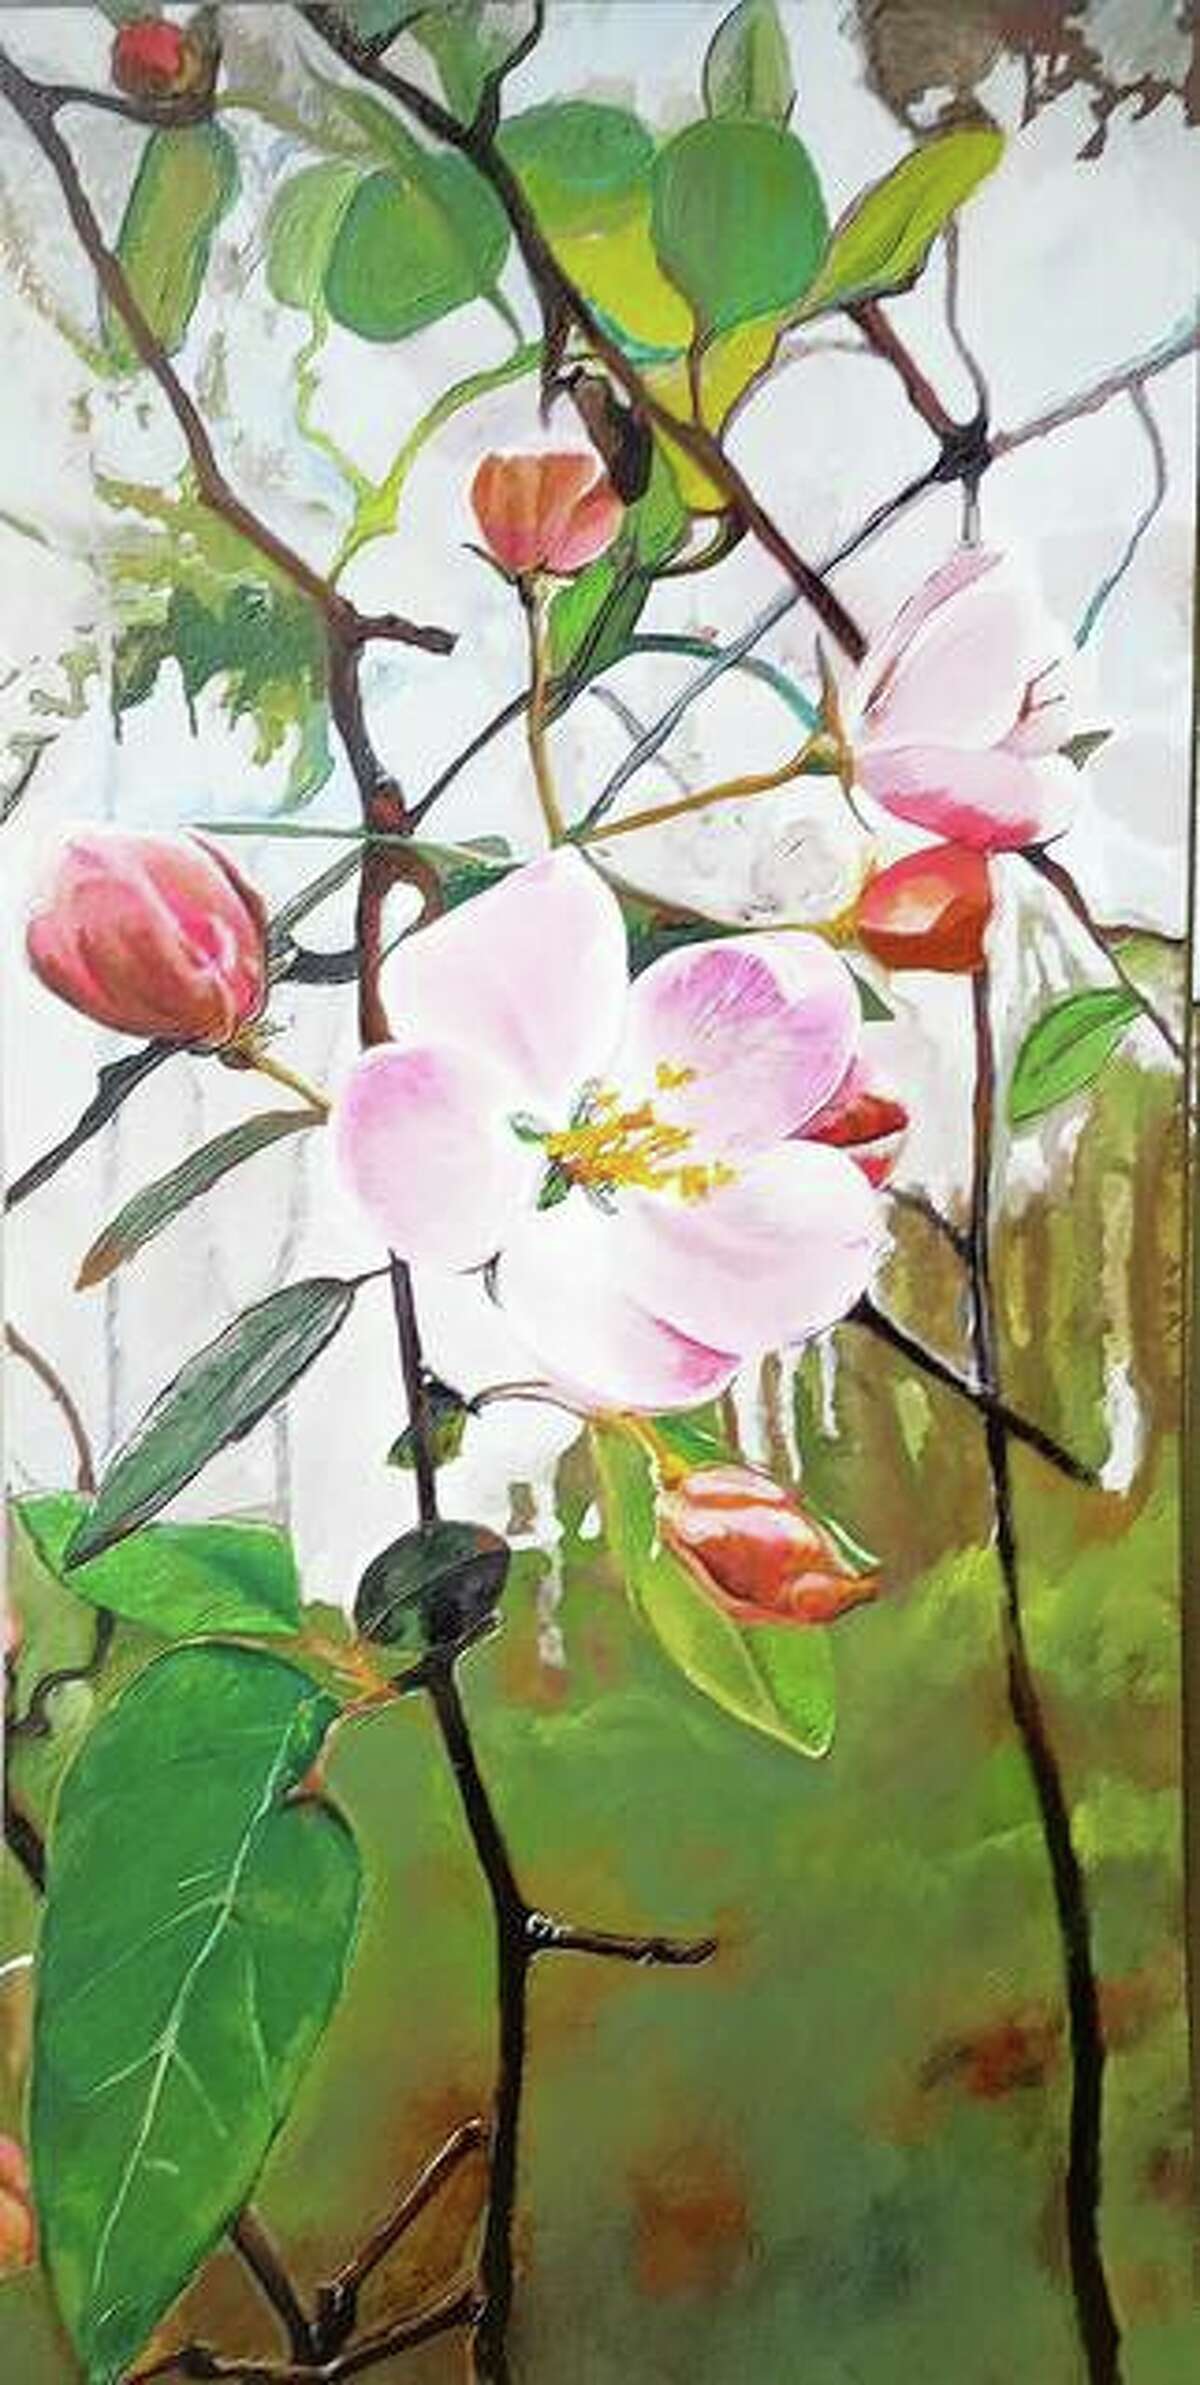 Artist Amy Denny’s “Iowa Crab Apple” will be displayed starting Sept. 11 at the David Strawn Art Gallery as part of the Art Association of Jacksonville’s 2021-22 gallery season. Paintings by Kevin Veara also will be featured in the joint show.